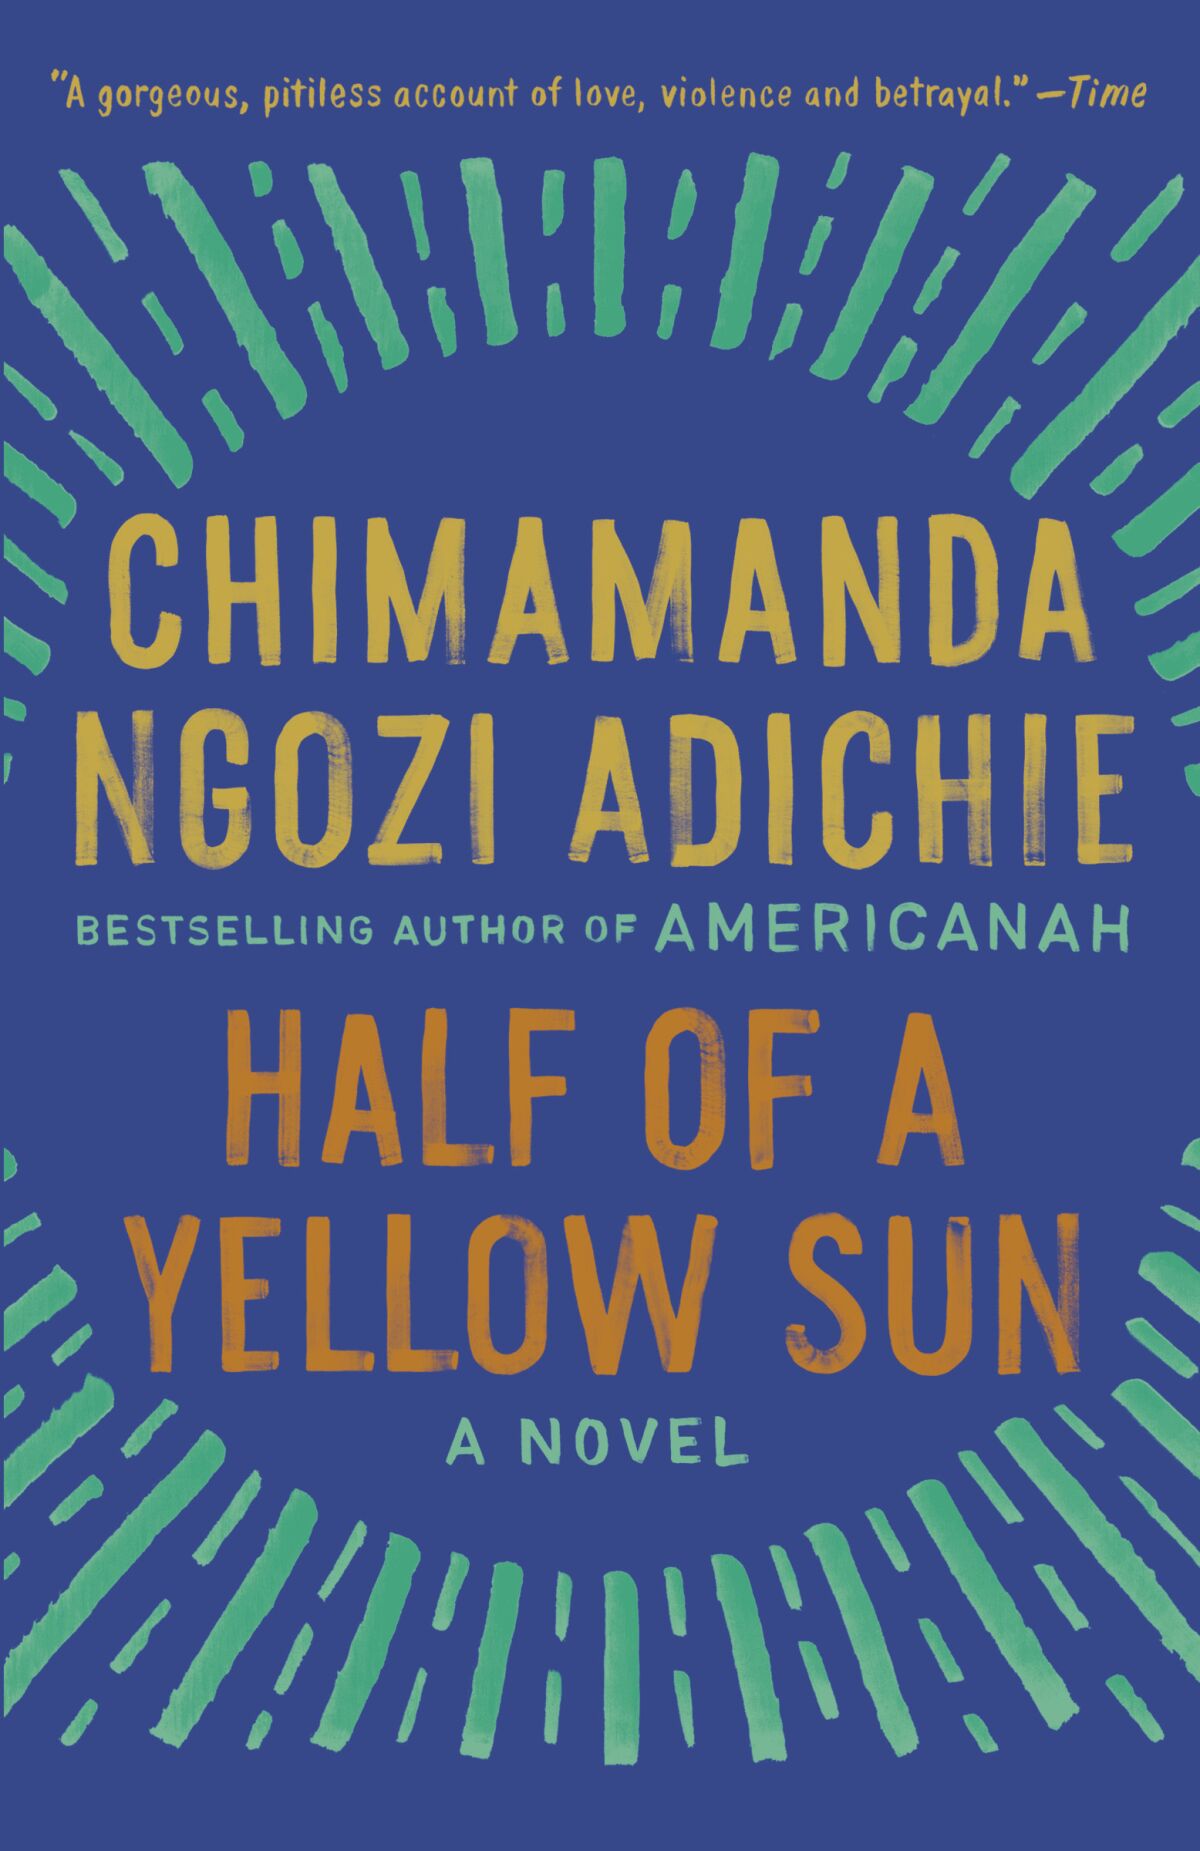 Book jacket for "Half of a Yellow Sun" by Chimamanda Ngozi Adichie. For Sunday Books story 5/24/20, about eight books to travel with.